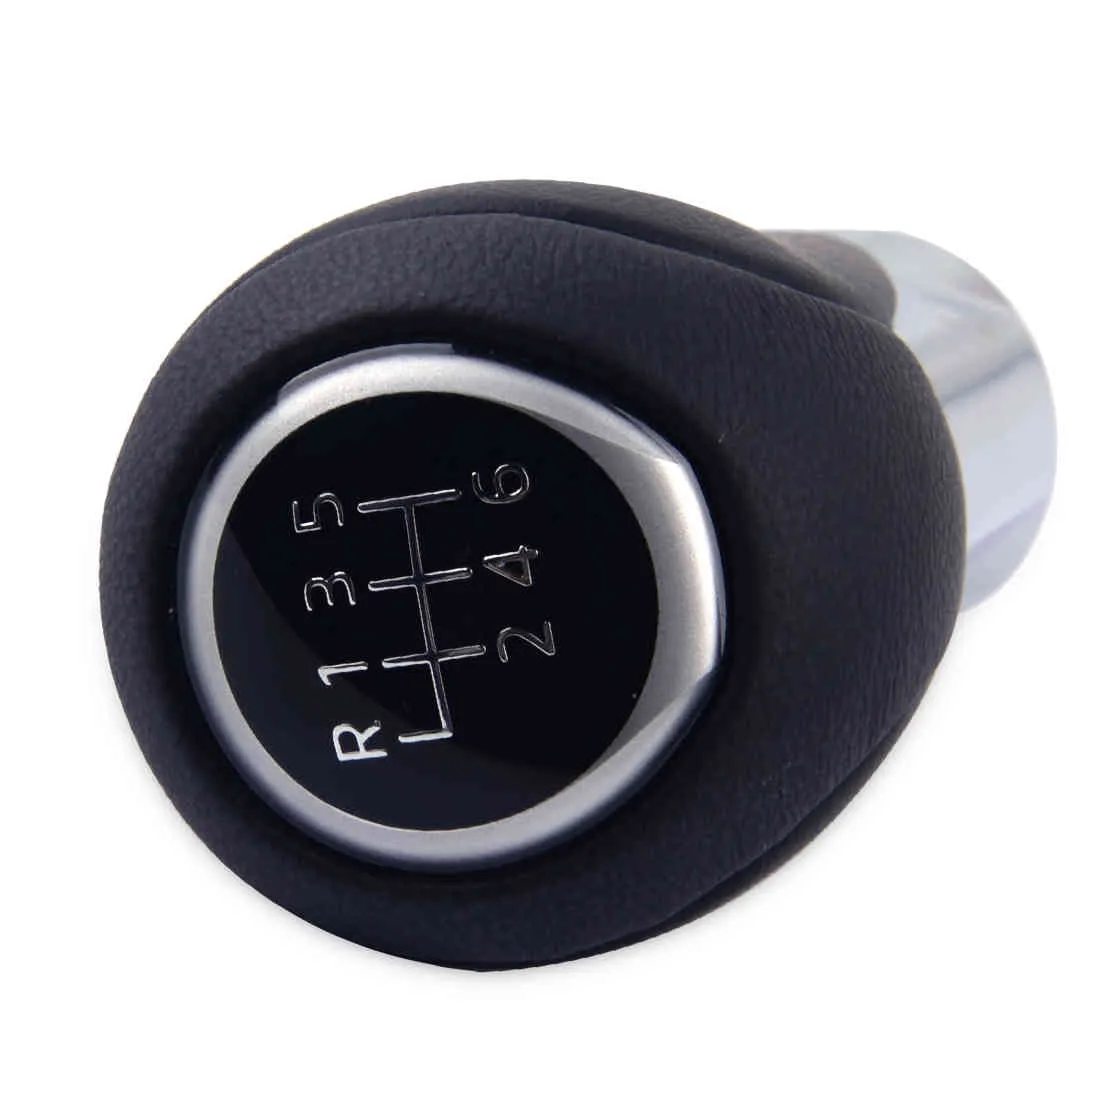 Citall 6 Speed ​​Leather Car Directory Manual Surners Hange Knob Black Fit for 3 CX-5 2013 2014 2015